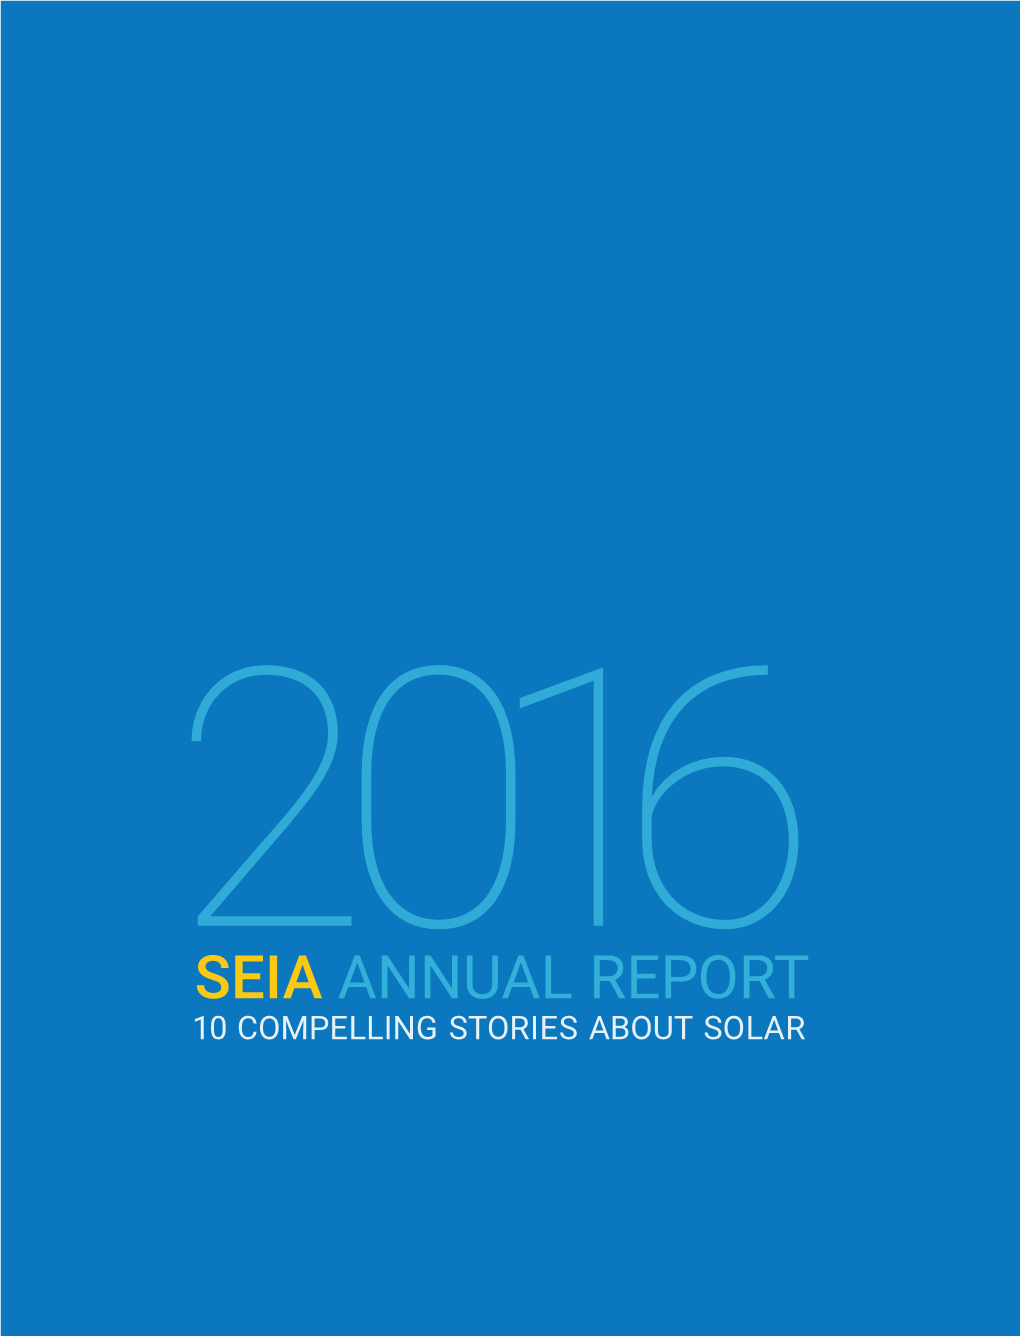 Download the SEIA Annual Report 2016